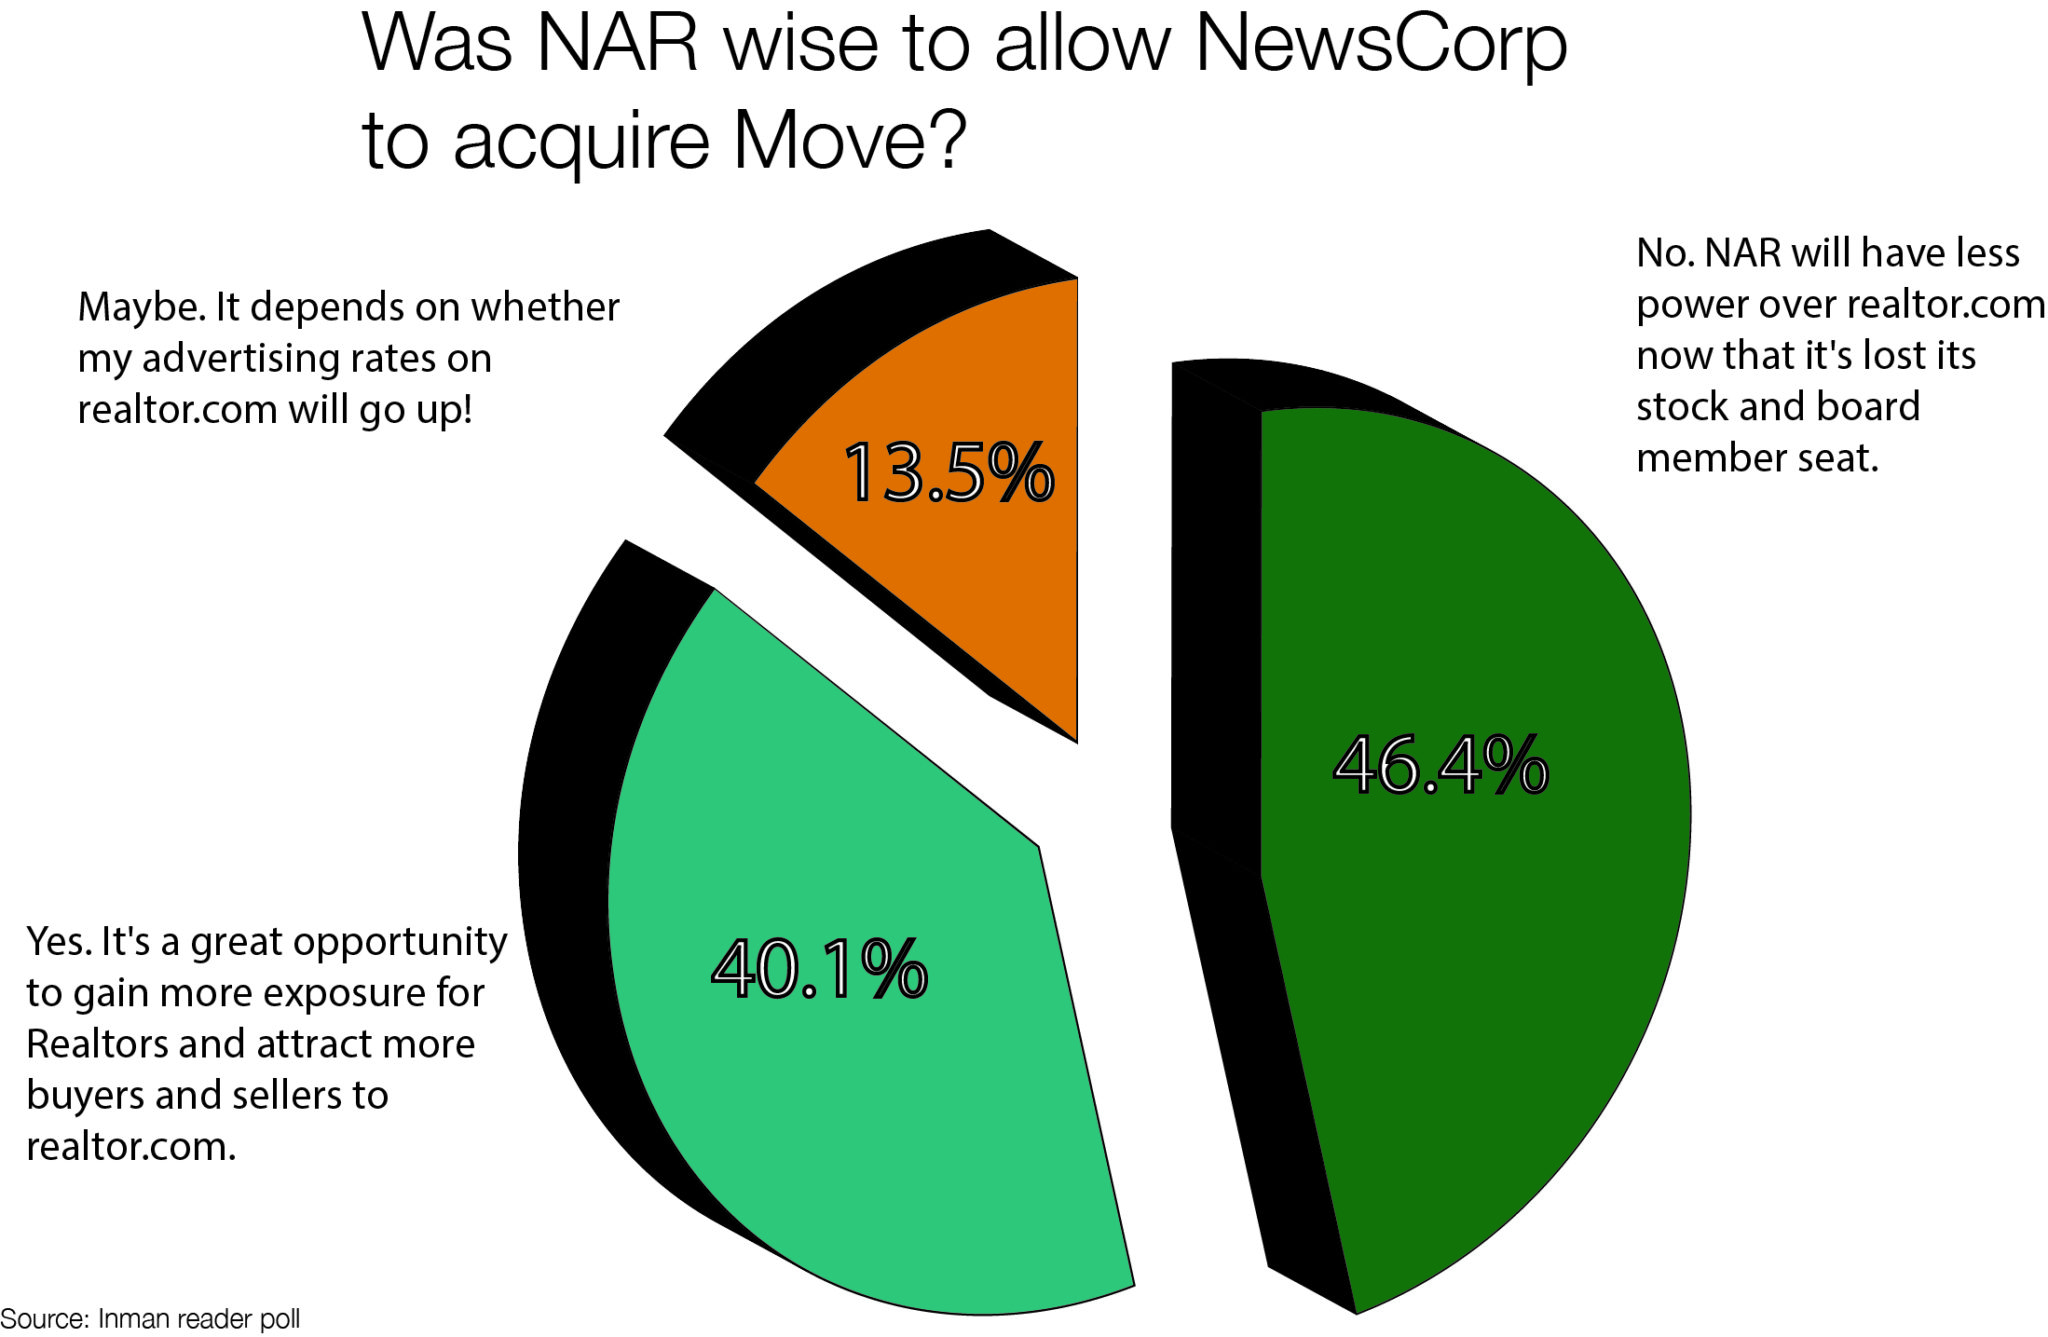 NAR-NewsCorps-Wise